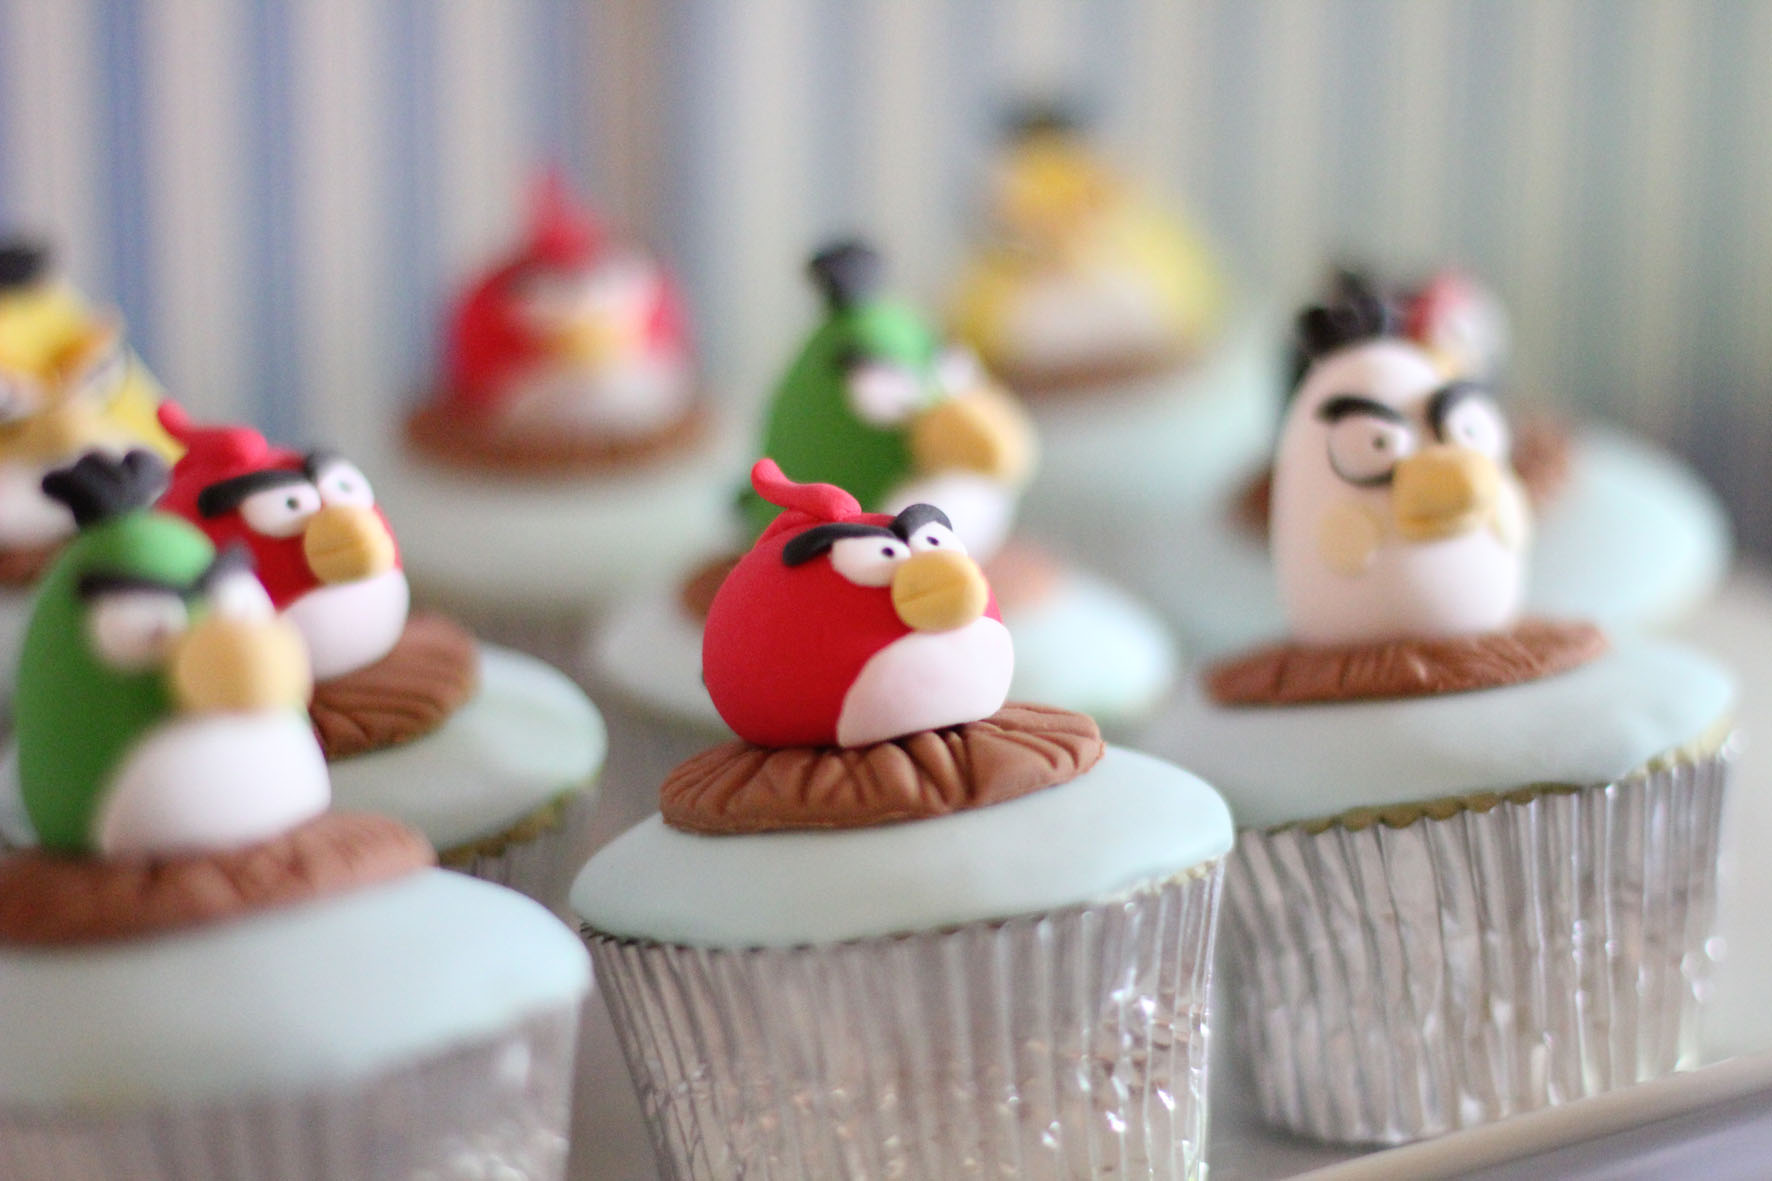 angry-birds-cupcakes - The Catch My Party Blog The Catch My Party Blog